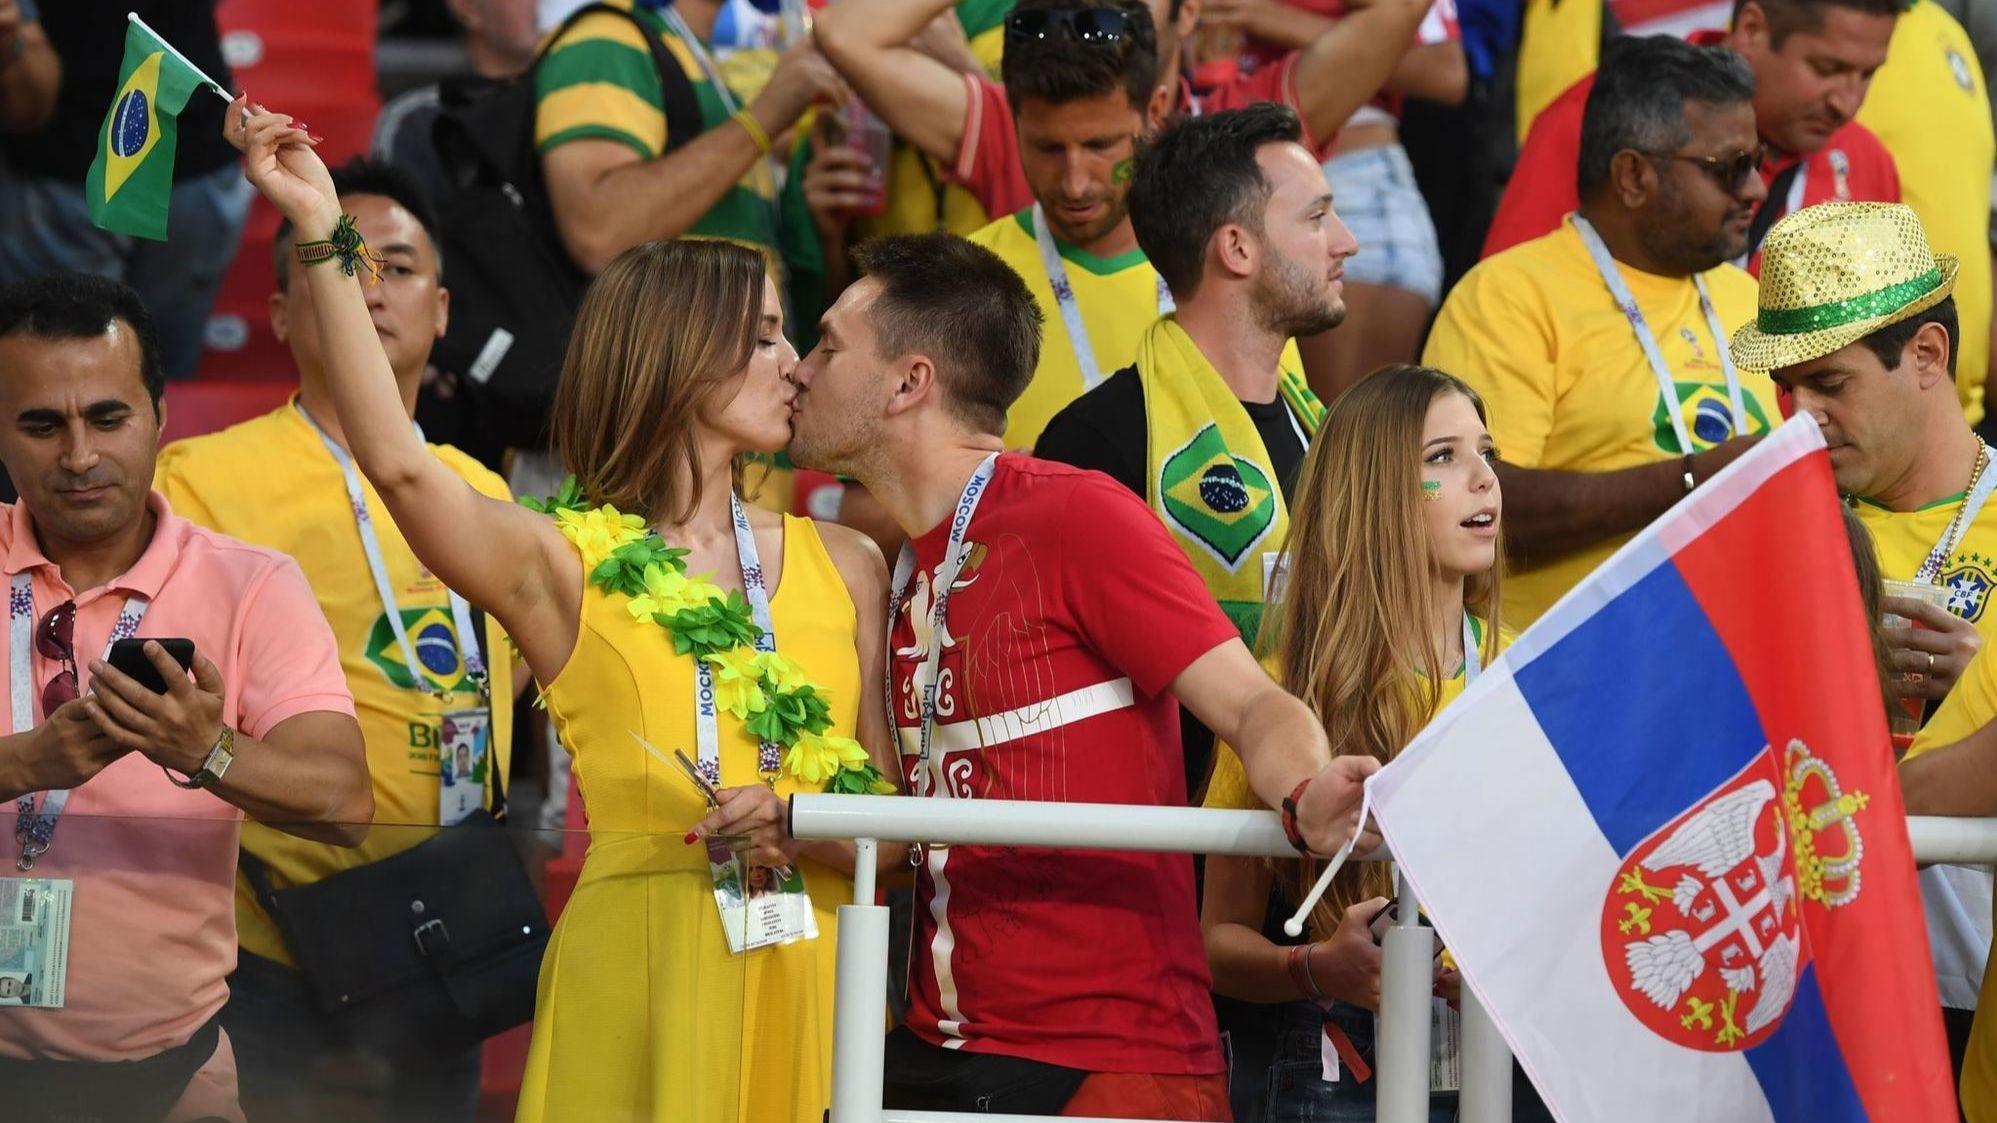 PHOTOS: The Hottest Fans At The 2014 World Cup (Slightly 